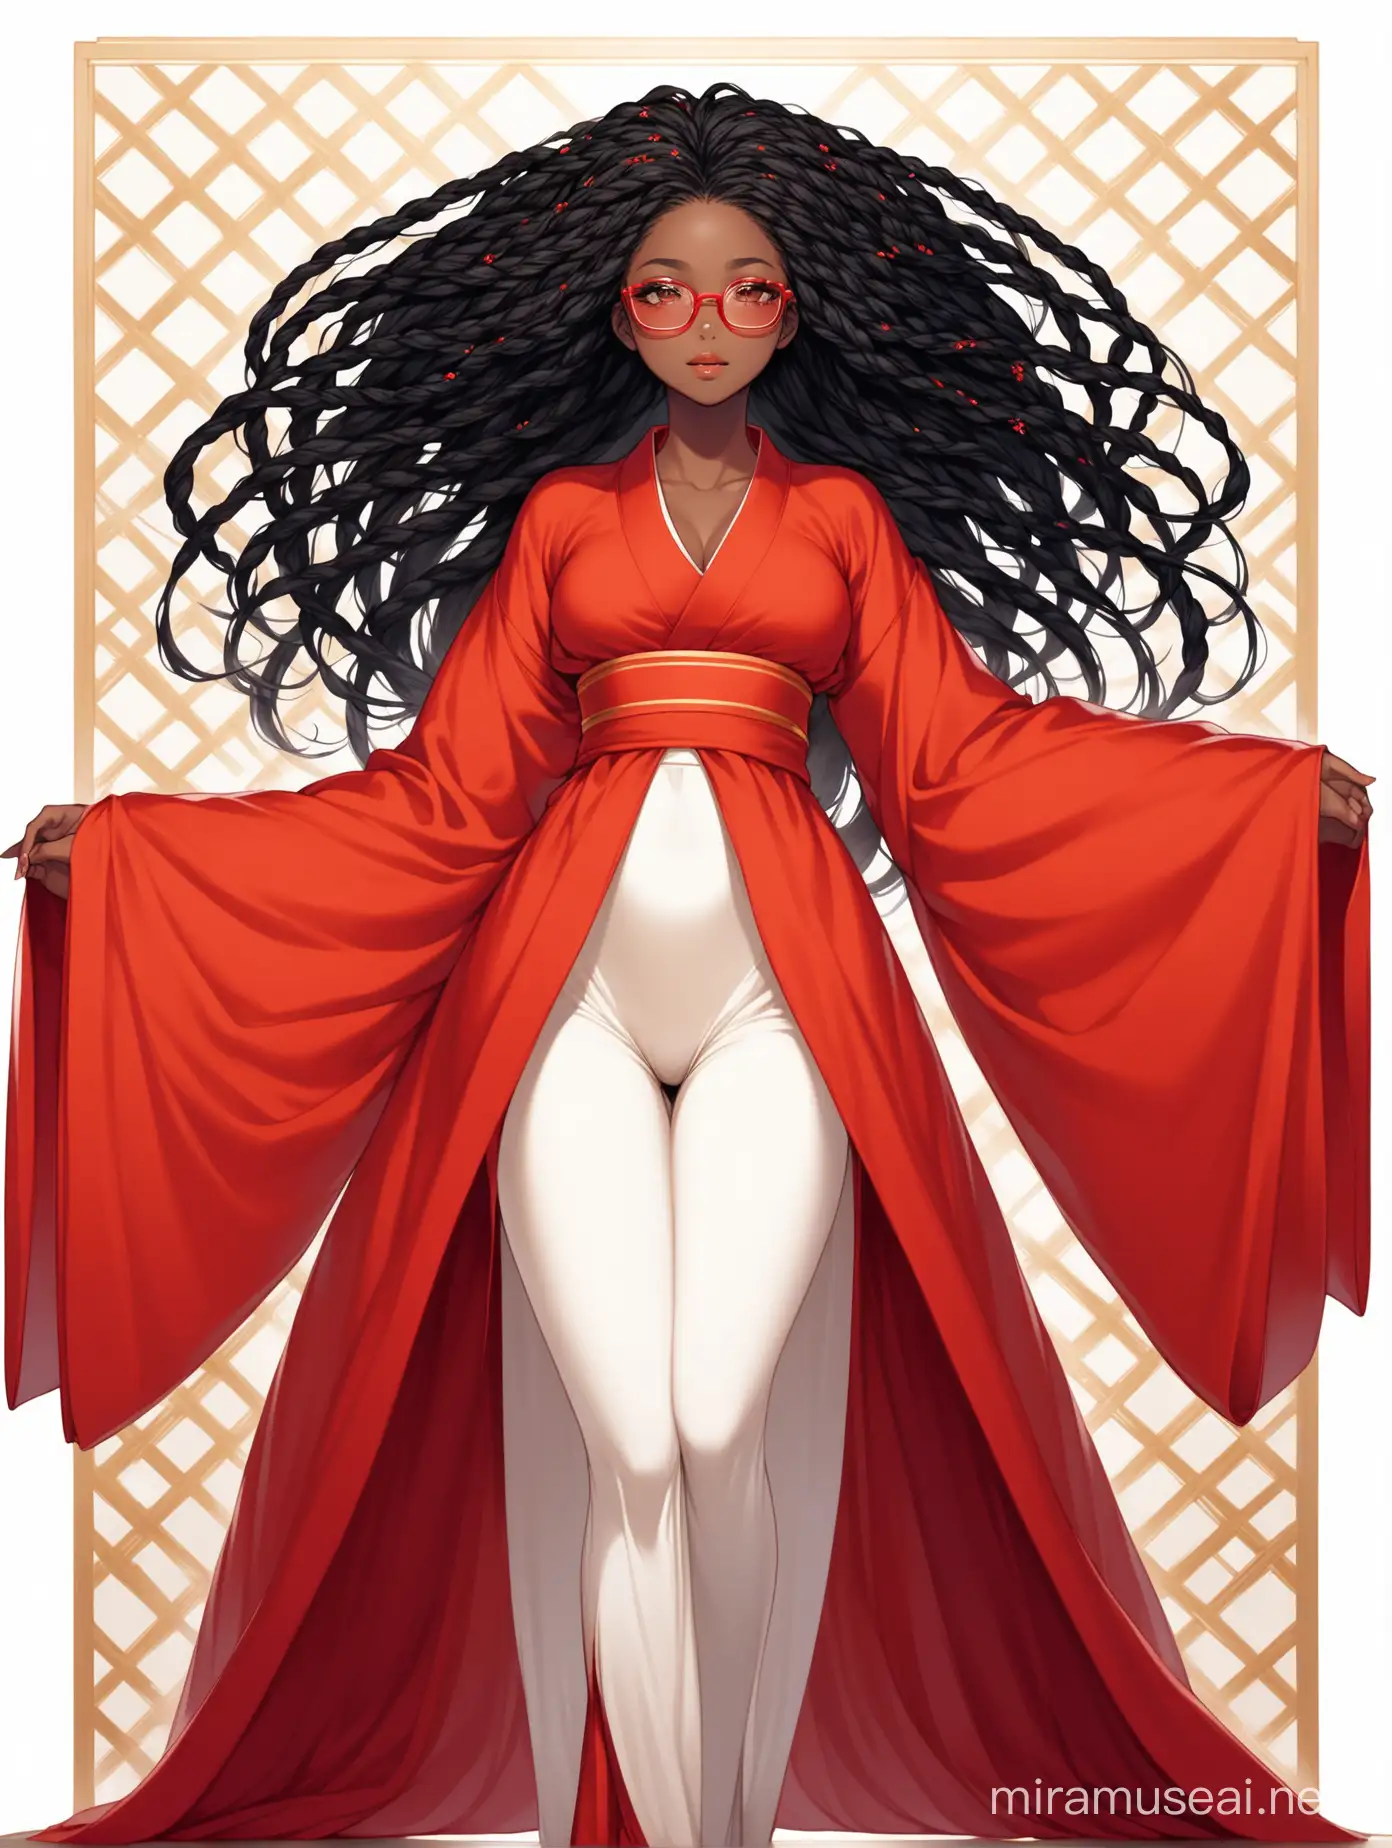 a japnaese style full body 21-year-old black woman emerges, she is looking up and you can see her entire body from here head to her feet, her features defined with tender elegance. She has long black twist in her hair, Adorned in red square glasses, white background, she embodies a harmony of strength and grace, a testament to the beauty found within and without, amidst the ephemeral splendor of nature's embrace.